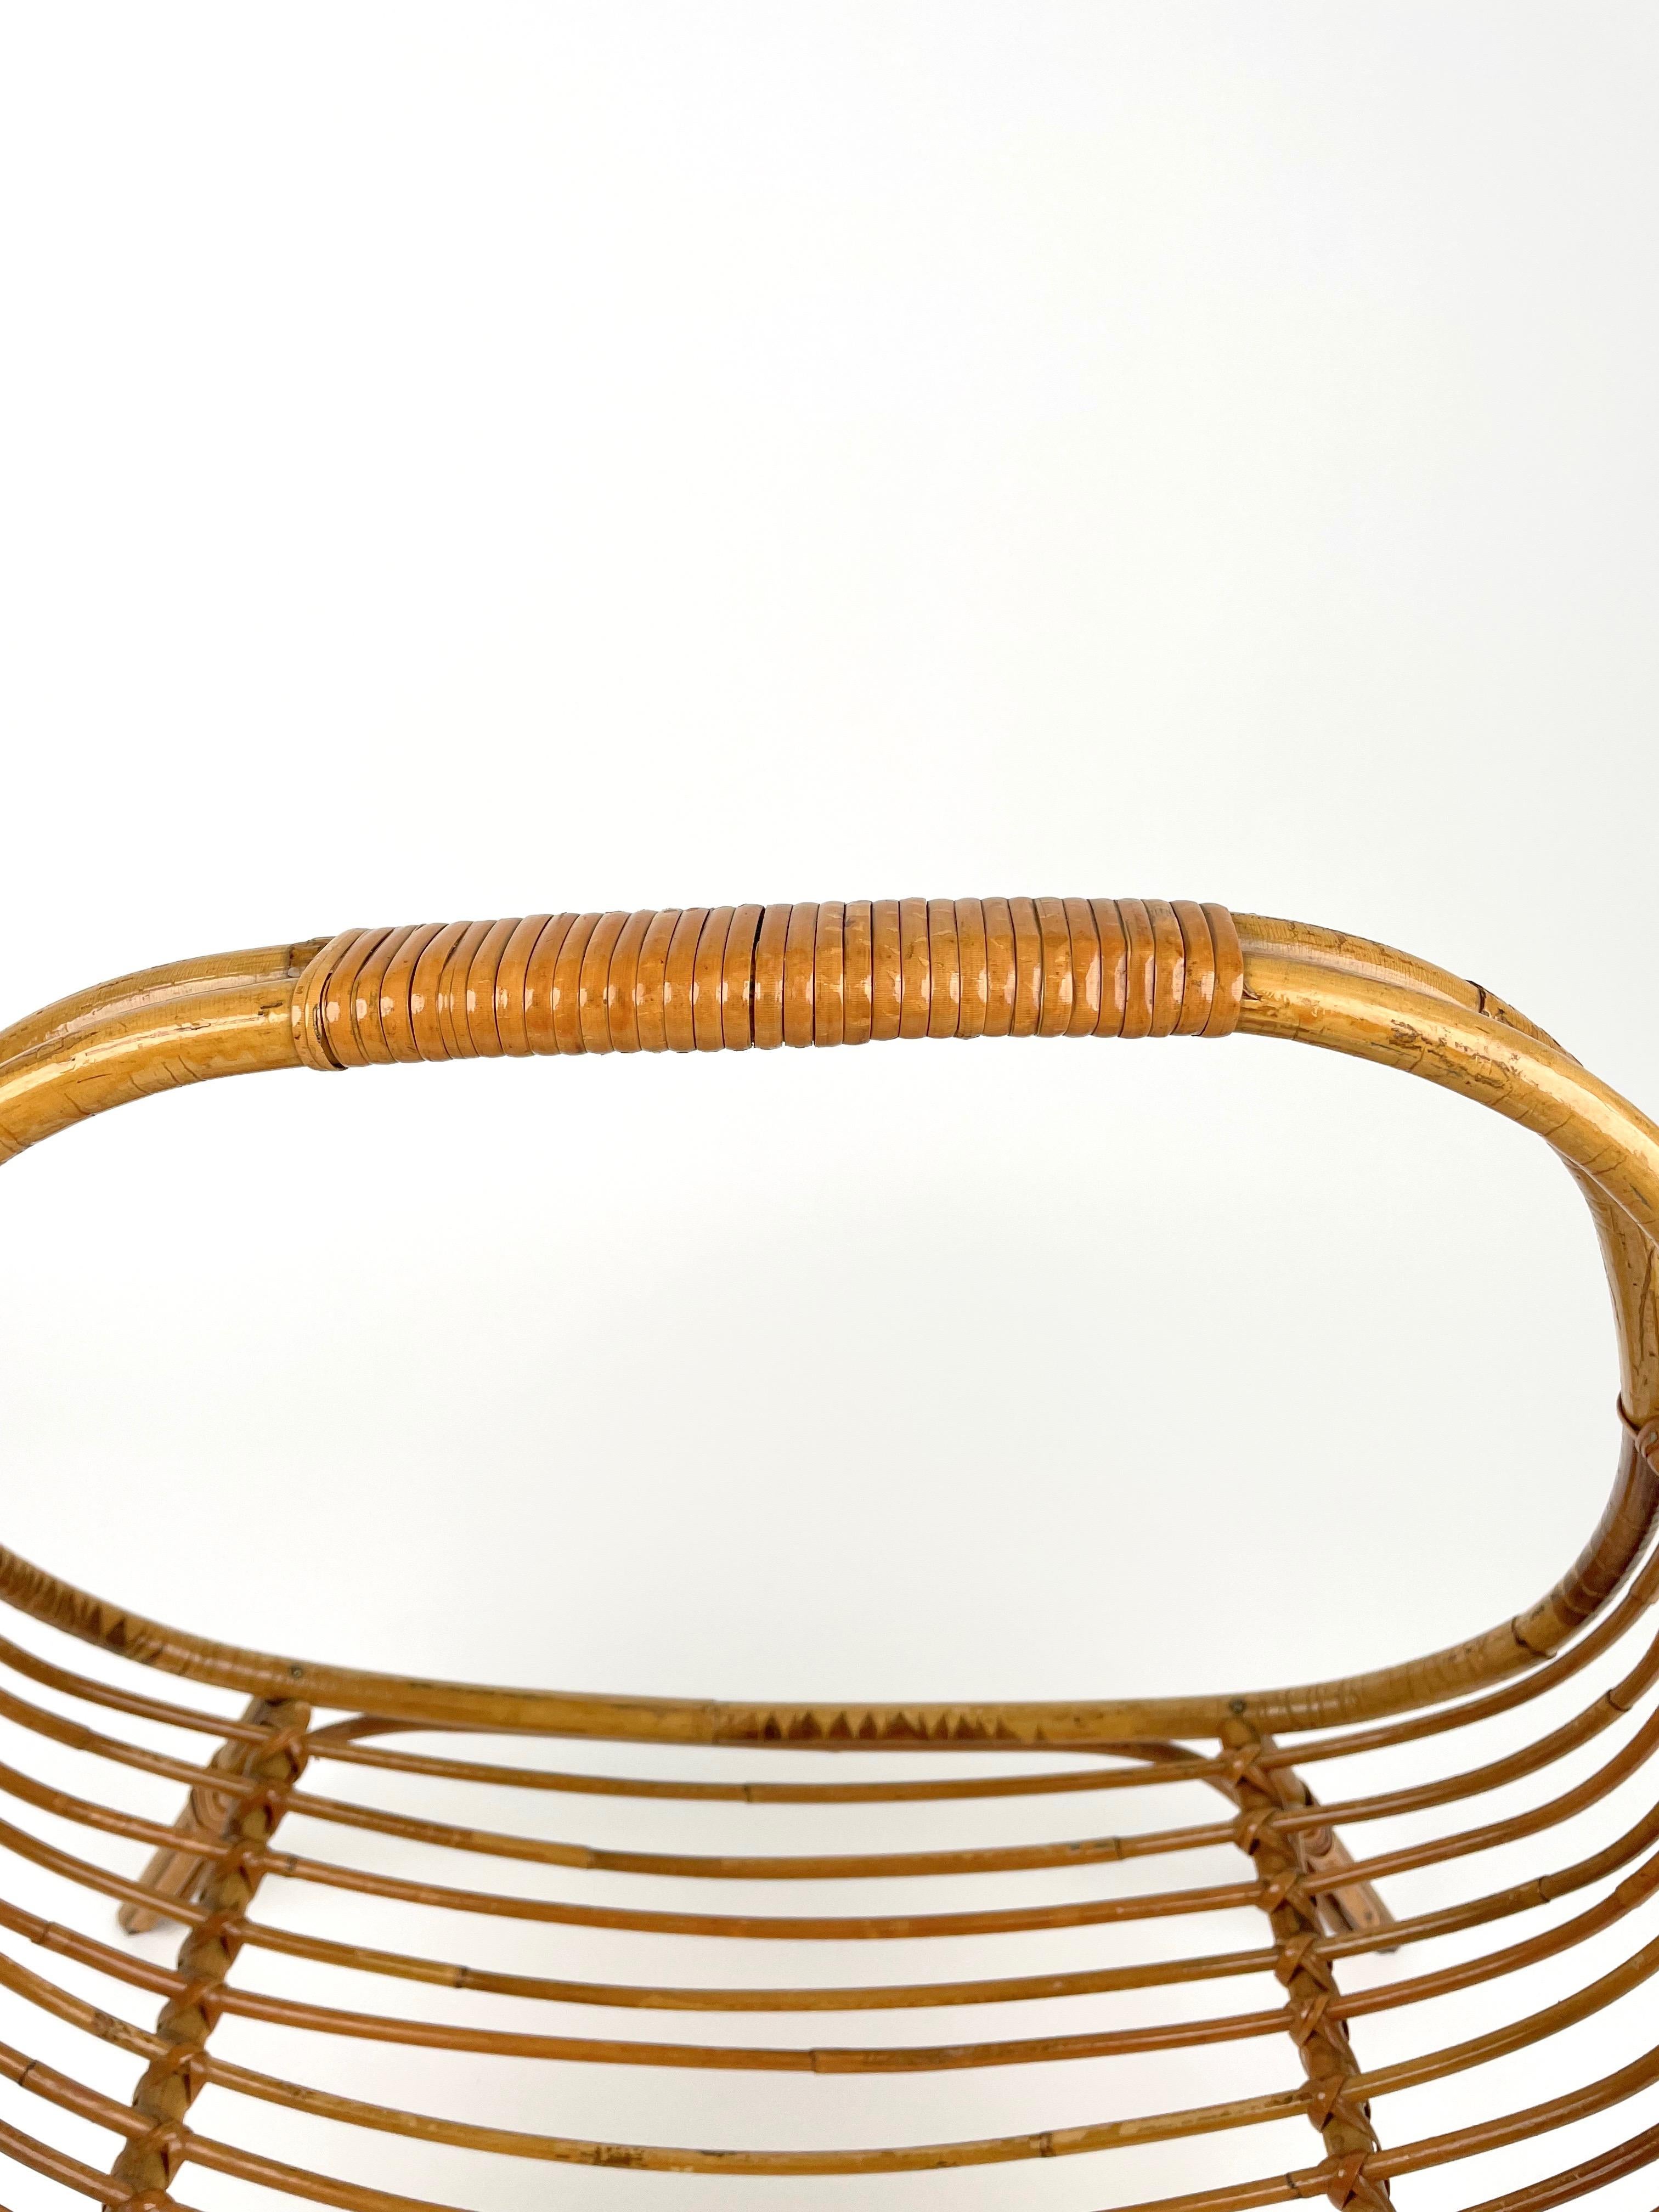 Midcentury Rattan & Bamboo Curved Magazine Rack, Italy 1960s For Sale 8